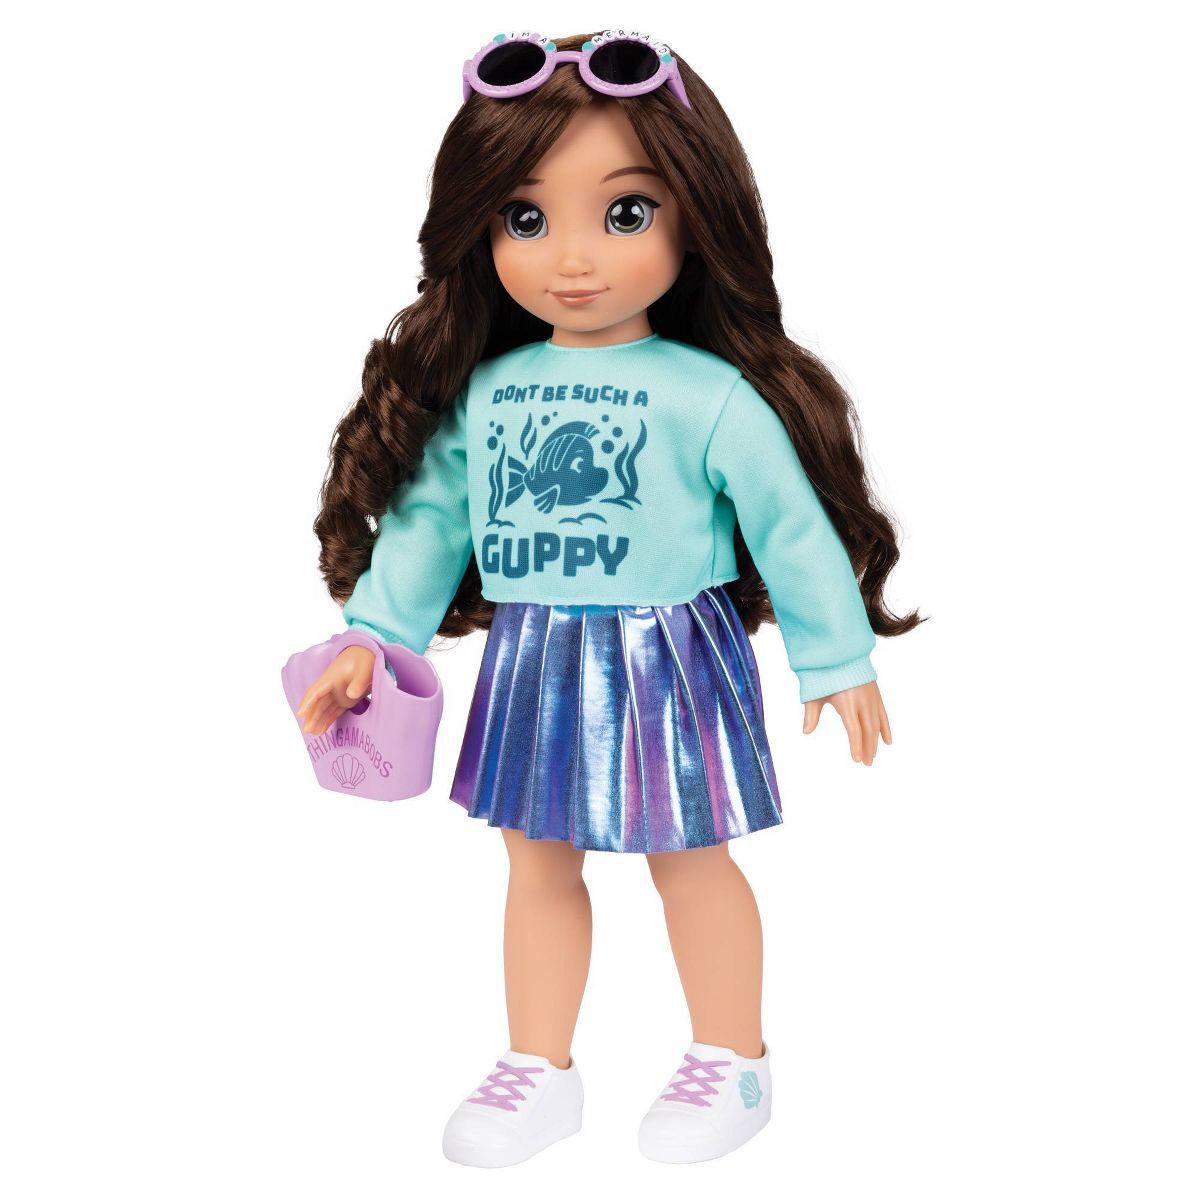 Disney ily 4EVER Inspired 18" by Ariel Doll | Target